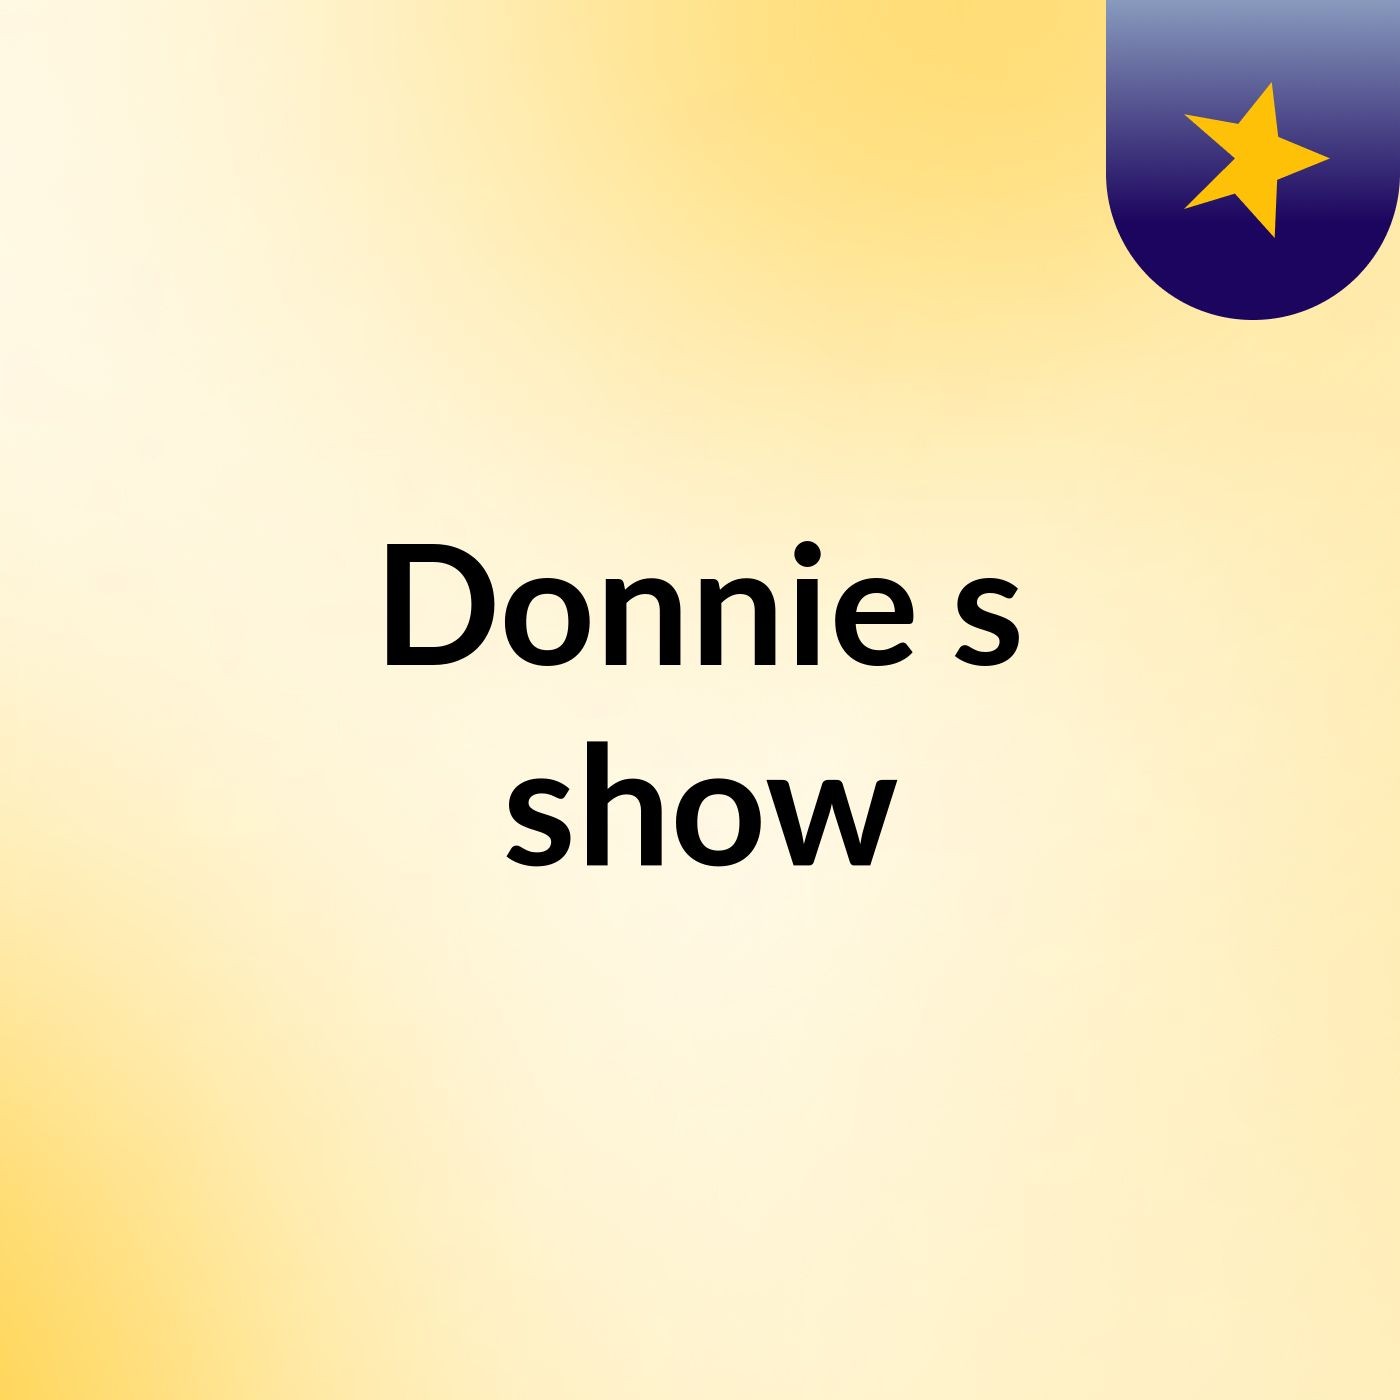 Donnie's show